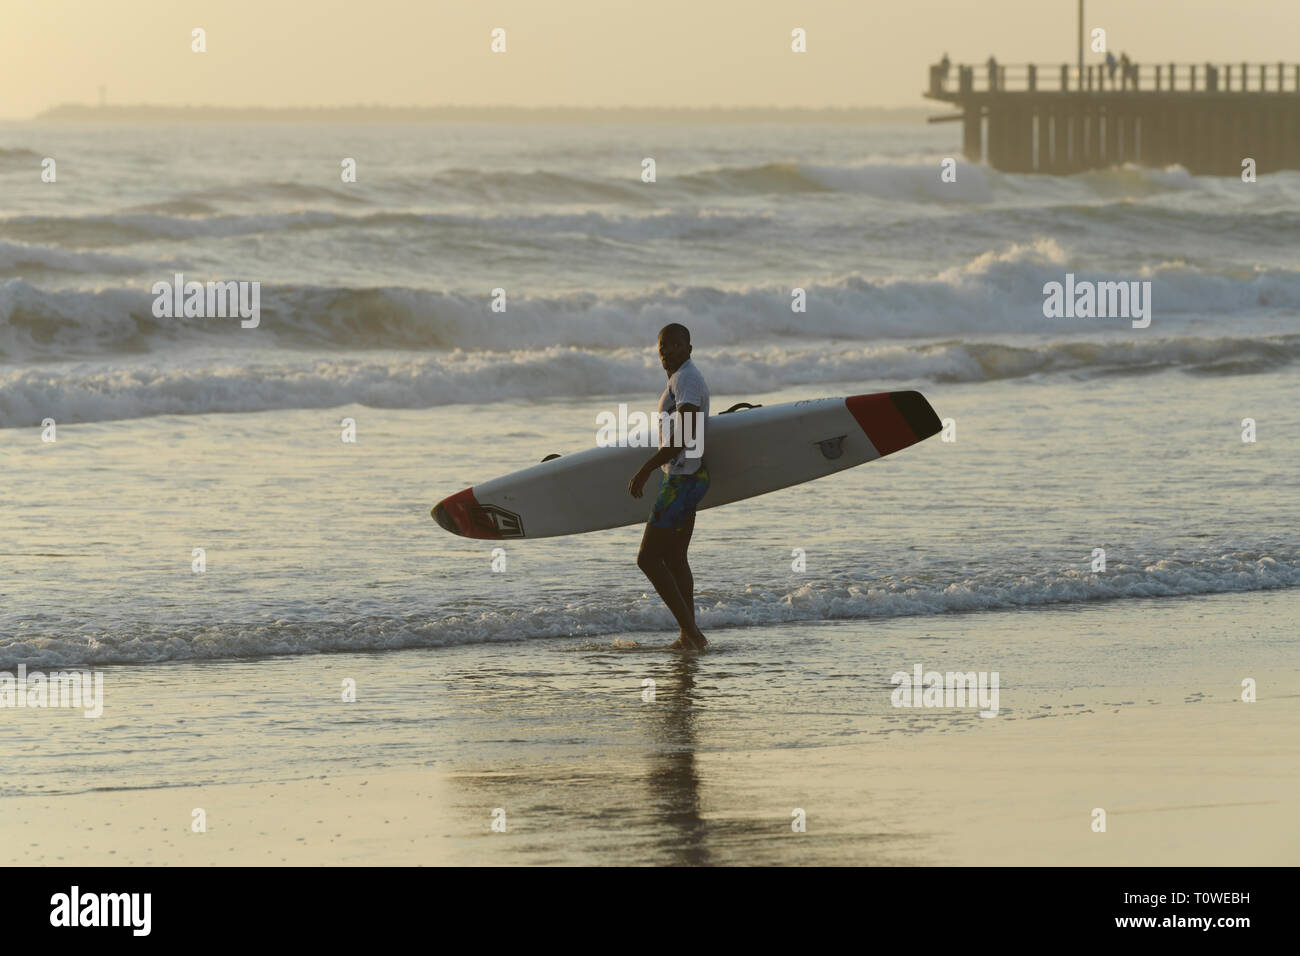 Durban, KwaZulu-Natal, South Africa, silhouette, single adult man walking with paddle board in surf on beach, sport, life-saving, people, landscape Stock Photo